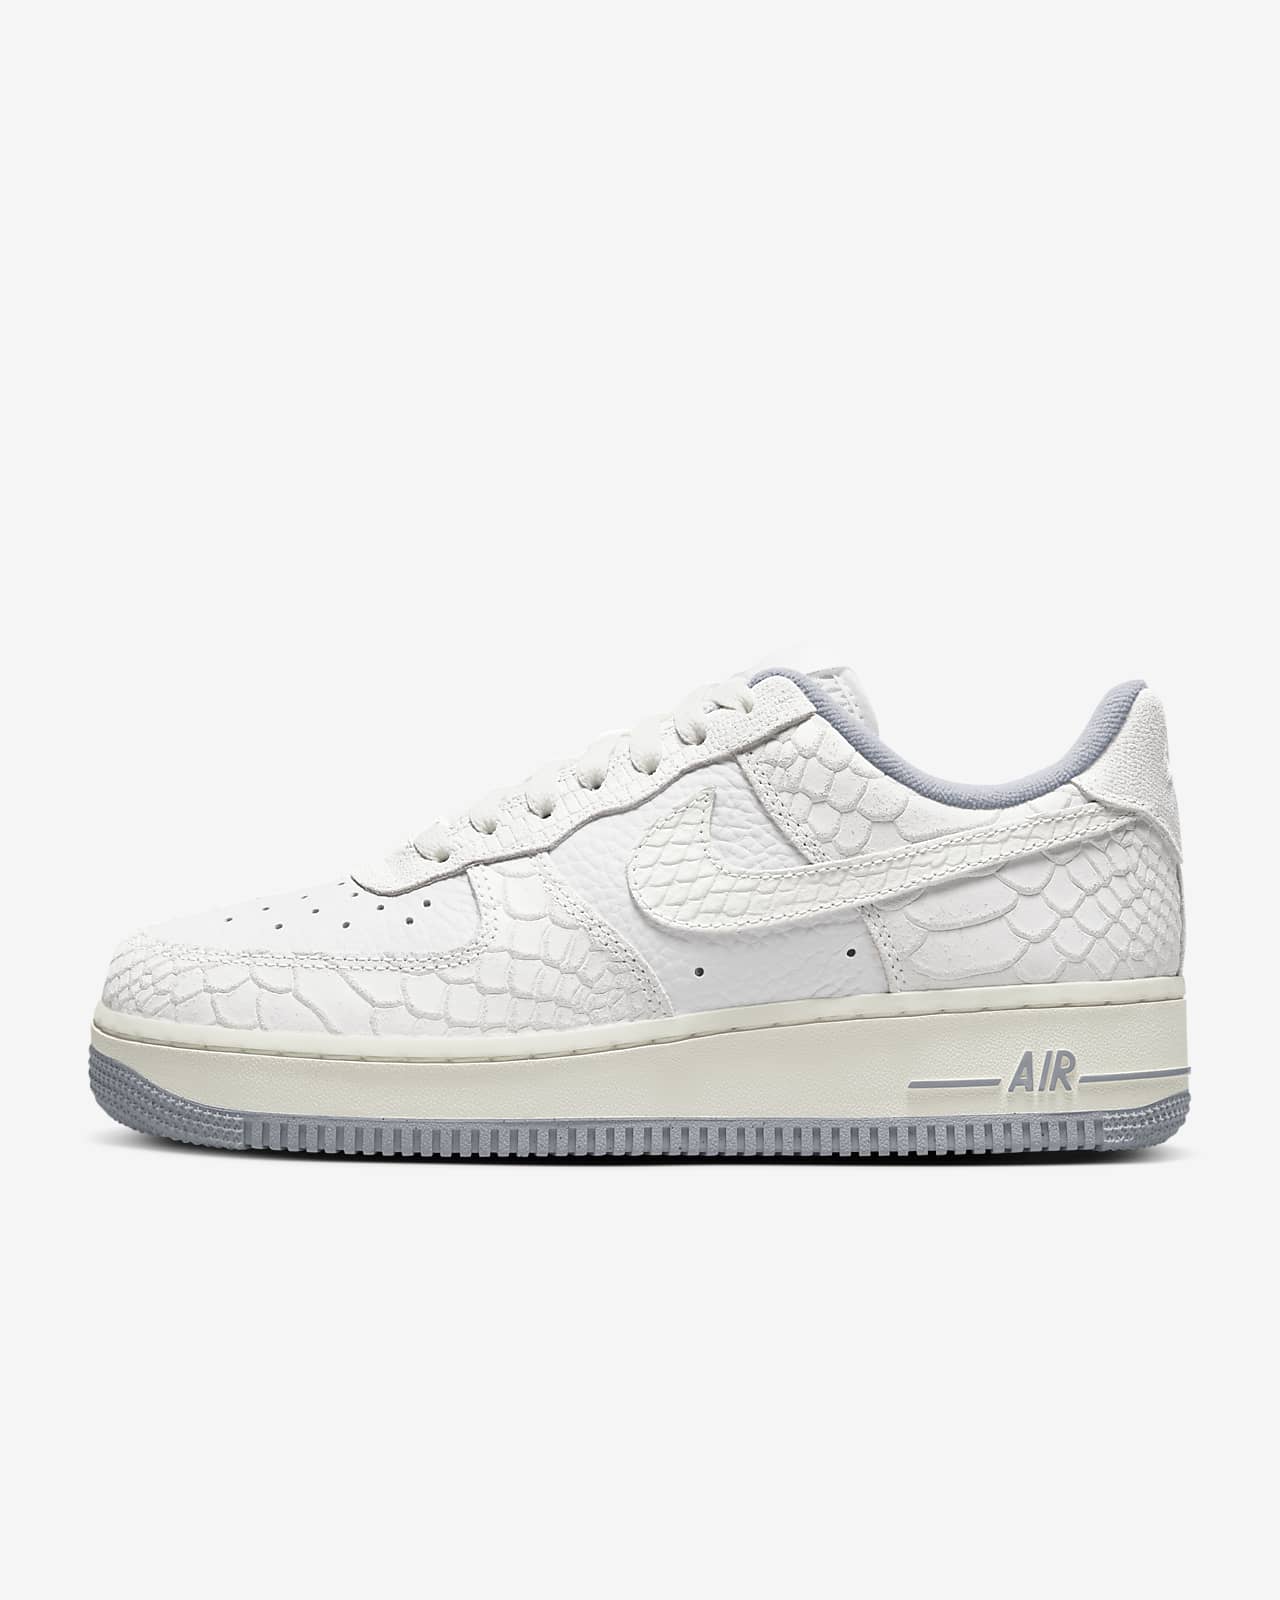 Nike Air Force 1 LV8 White Croc Review